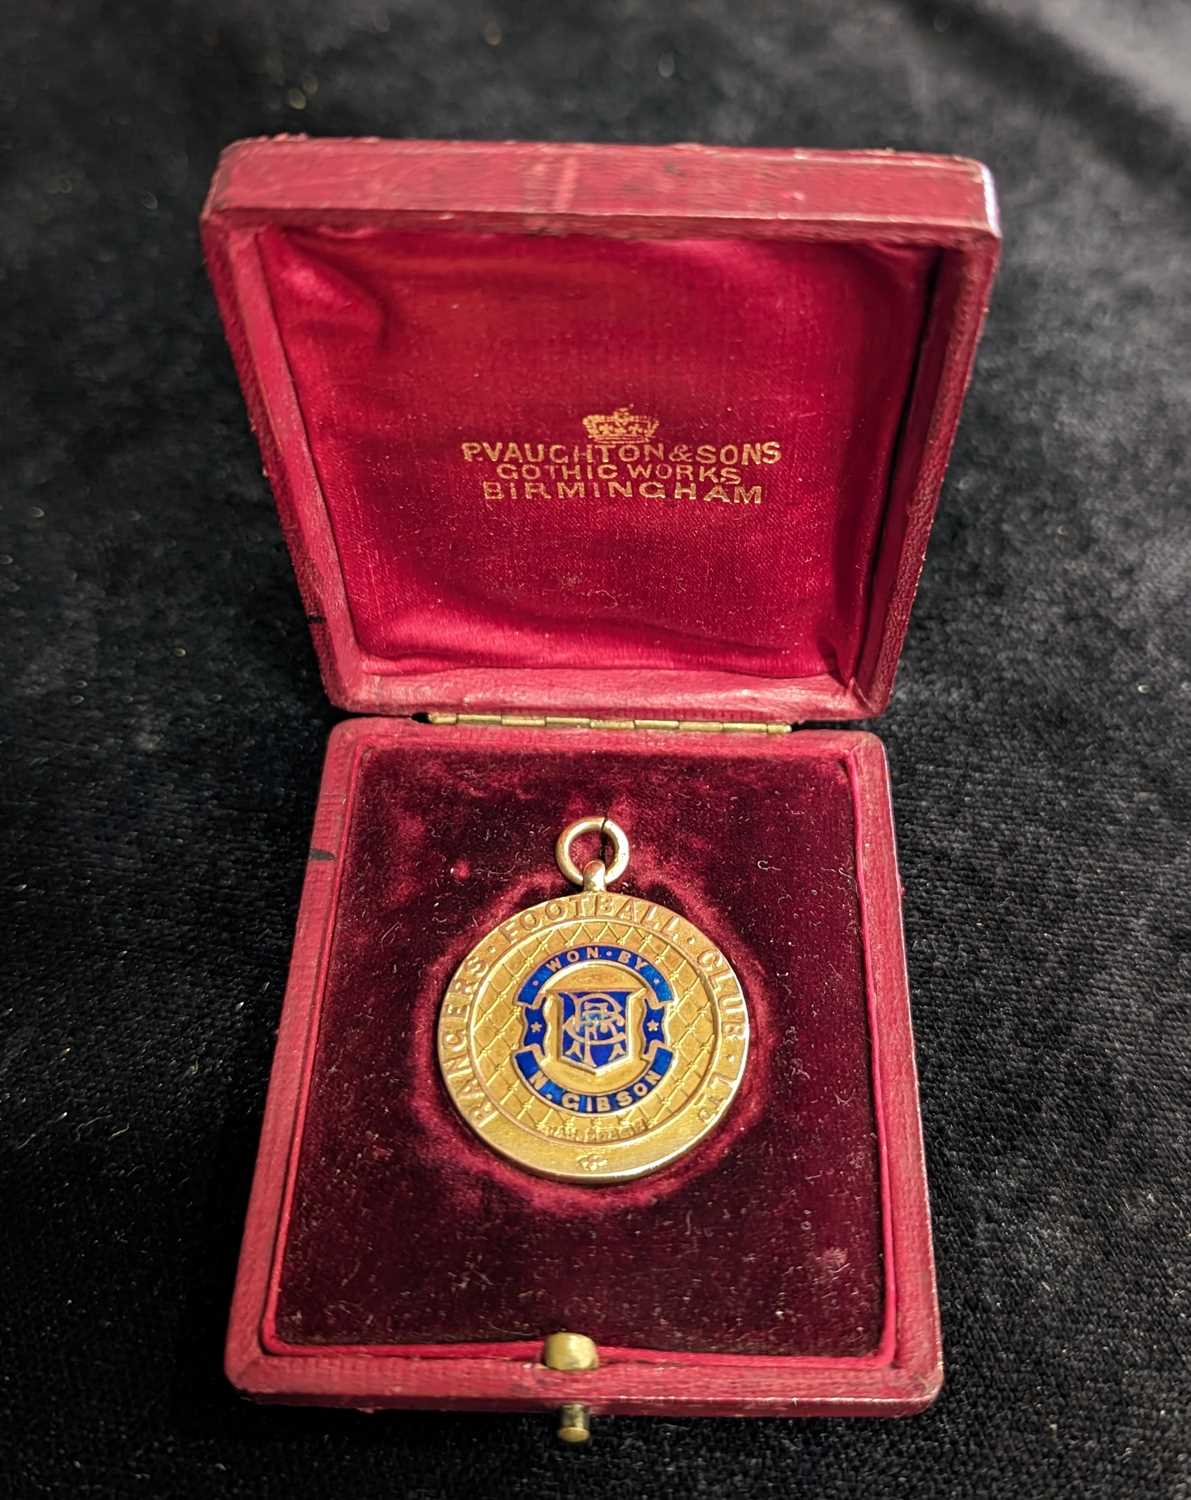 NEIL 'NEILLY' GIBSON OF RANGERS F.C., SCOTTISH LEAGUE CHAMPIONSHIP GOLD MEDAL, 1899/1900 - Image 3 of 4